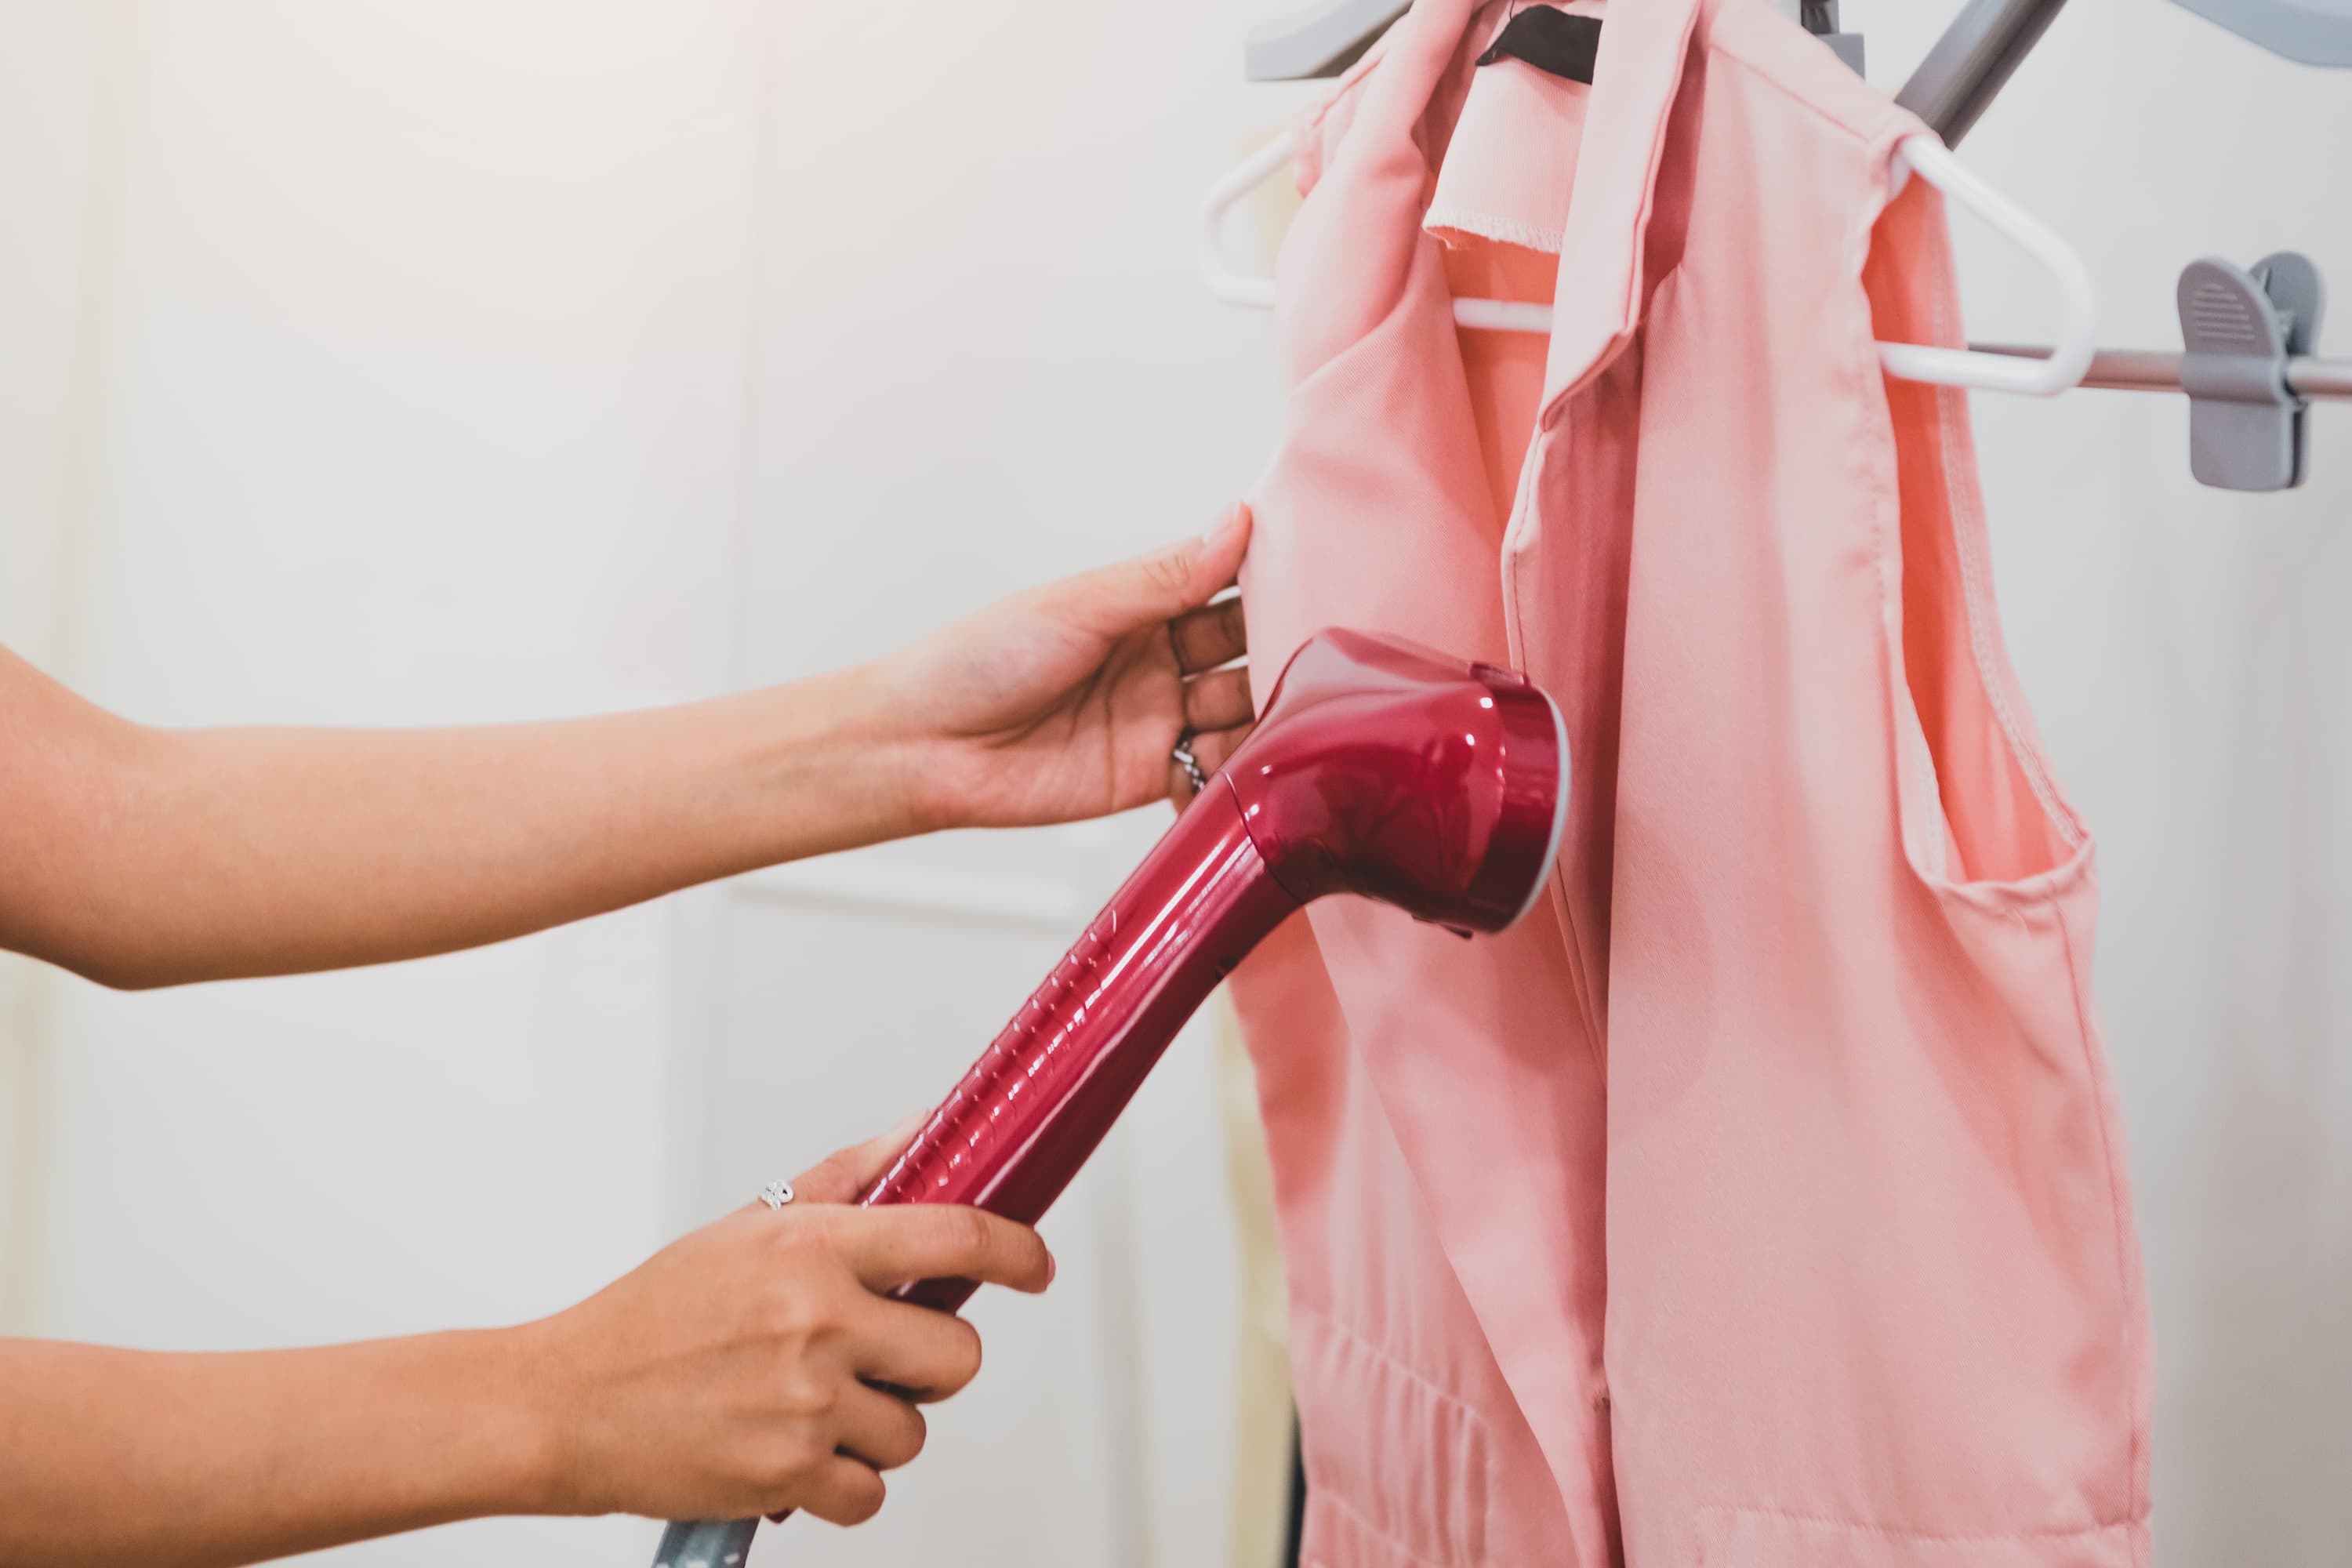 How to Use a Steamer on Clothes